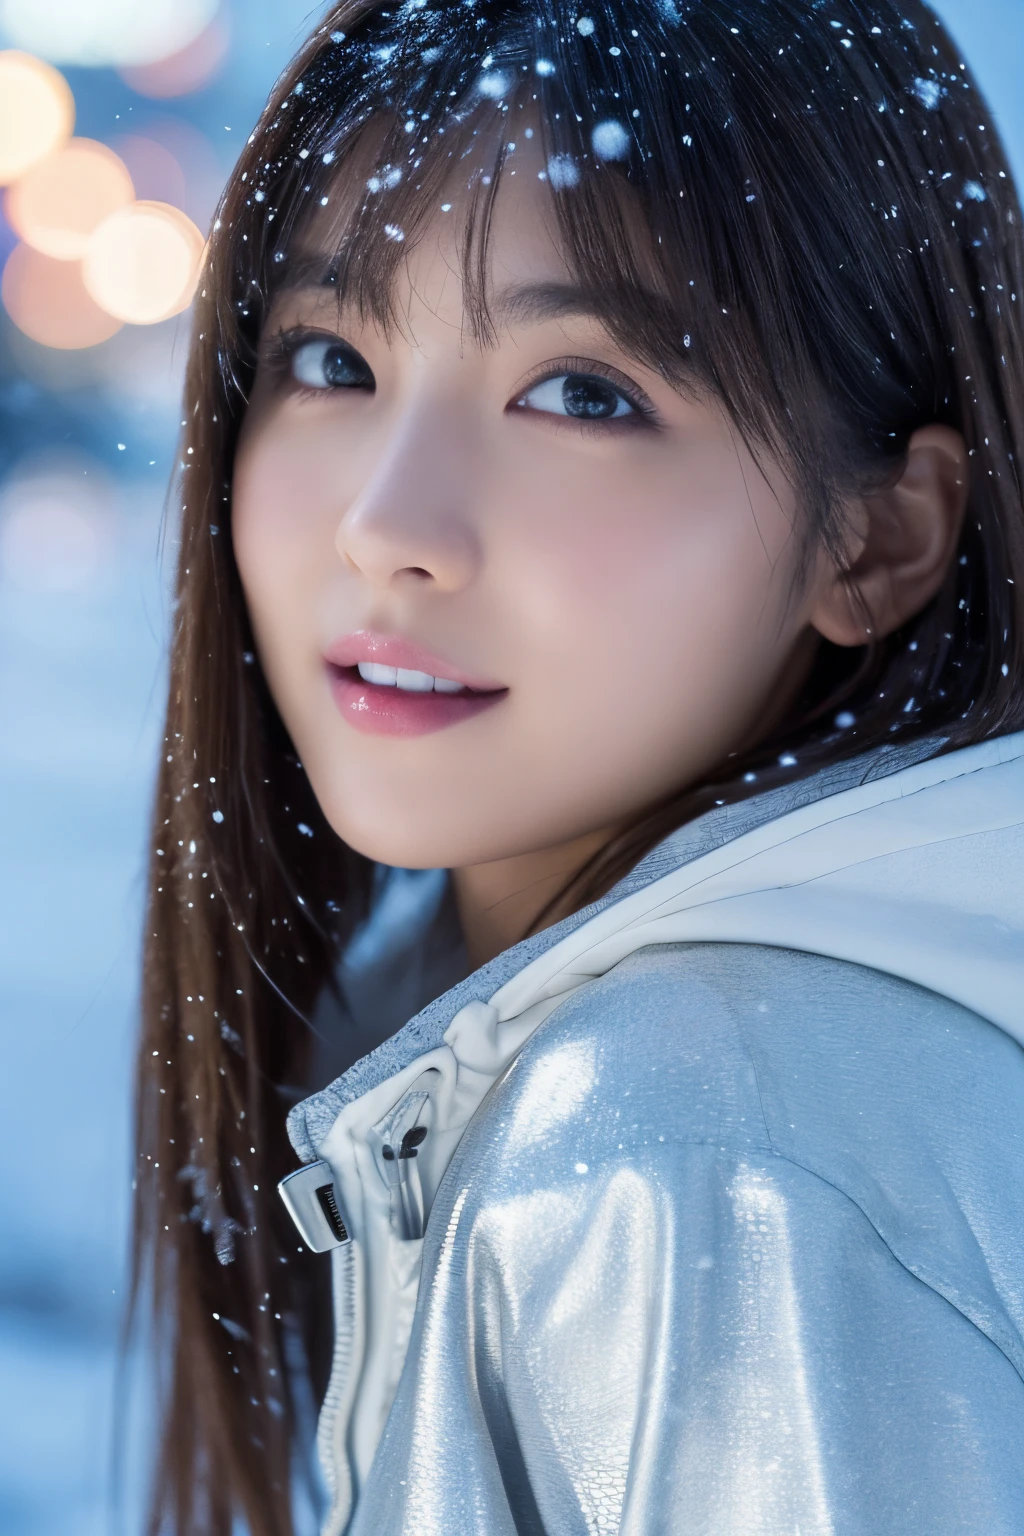 1girl in, (wear a platinum coat:1.2), (Raw photo, Best Quality), (Realistic, Photorealsitic:1.4), masutepiece, Extremely delicate and beautiful, Extremely detailed, 2k wallpaper, amazing, finely detail, the Extremely Detailed CG Unity 8K Wallpapers, Ultra-detailed, hight resolution, Soft light, Beautiful detailed girl, extremely detailed eye and face, beautiful detailed nose, Beautiful detailed eyes, Cinematic lighting, Illuminations coloring the city on a snowy night, Snowy landscape, It's snowing, Snow in the hair, Perfect Anatomy, Slender body, Taut, 
Straight semi-long hair, Bangs, Looking at Viewer, A slight smil